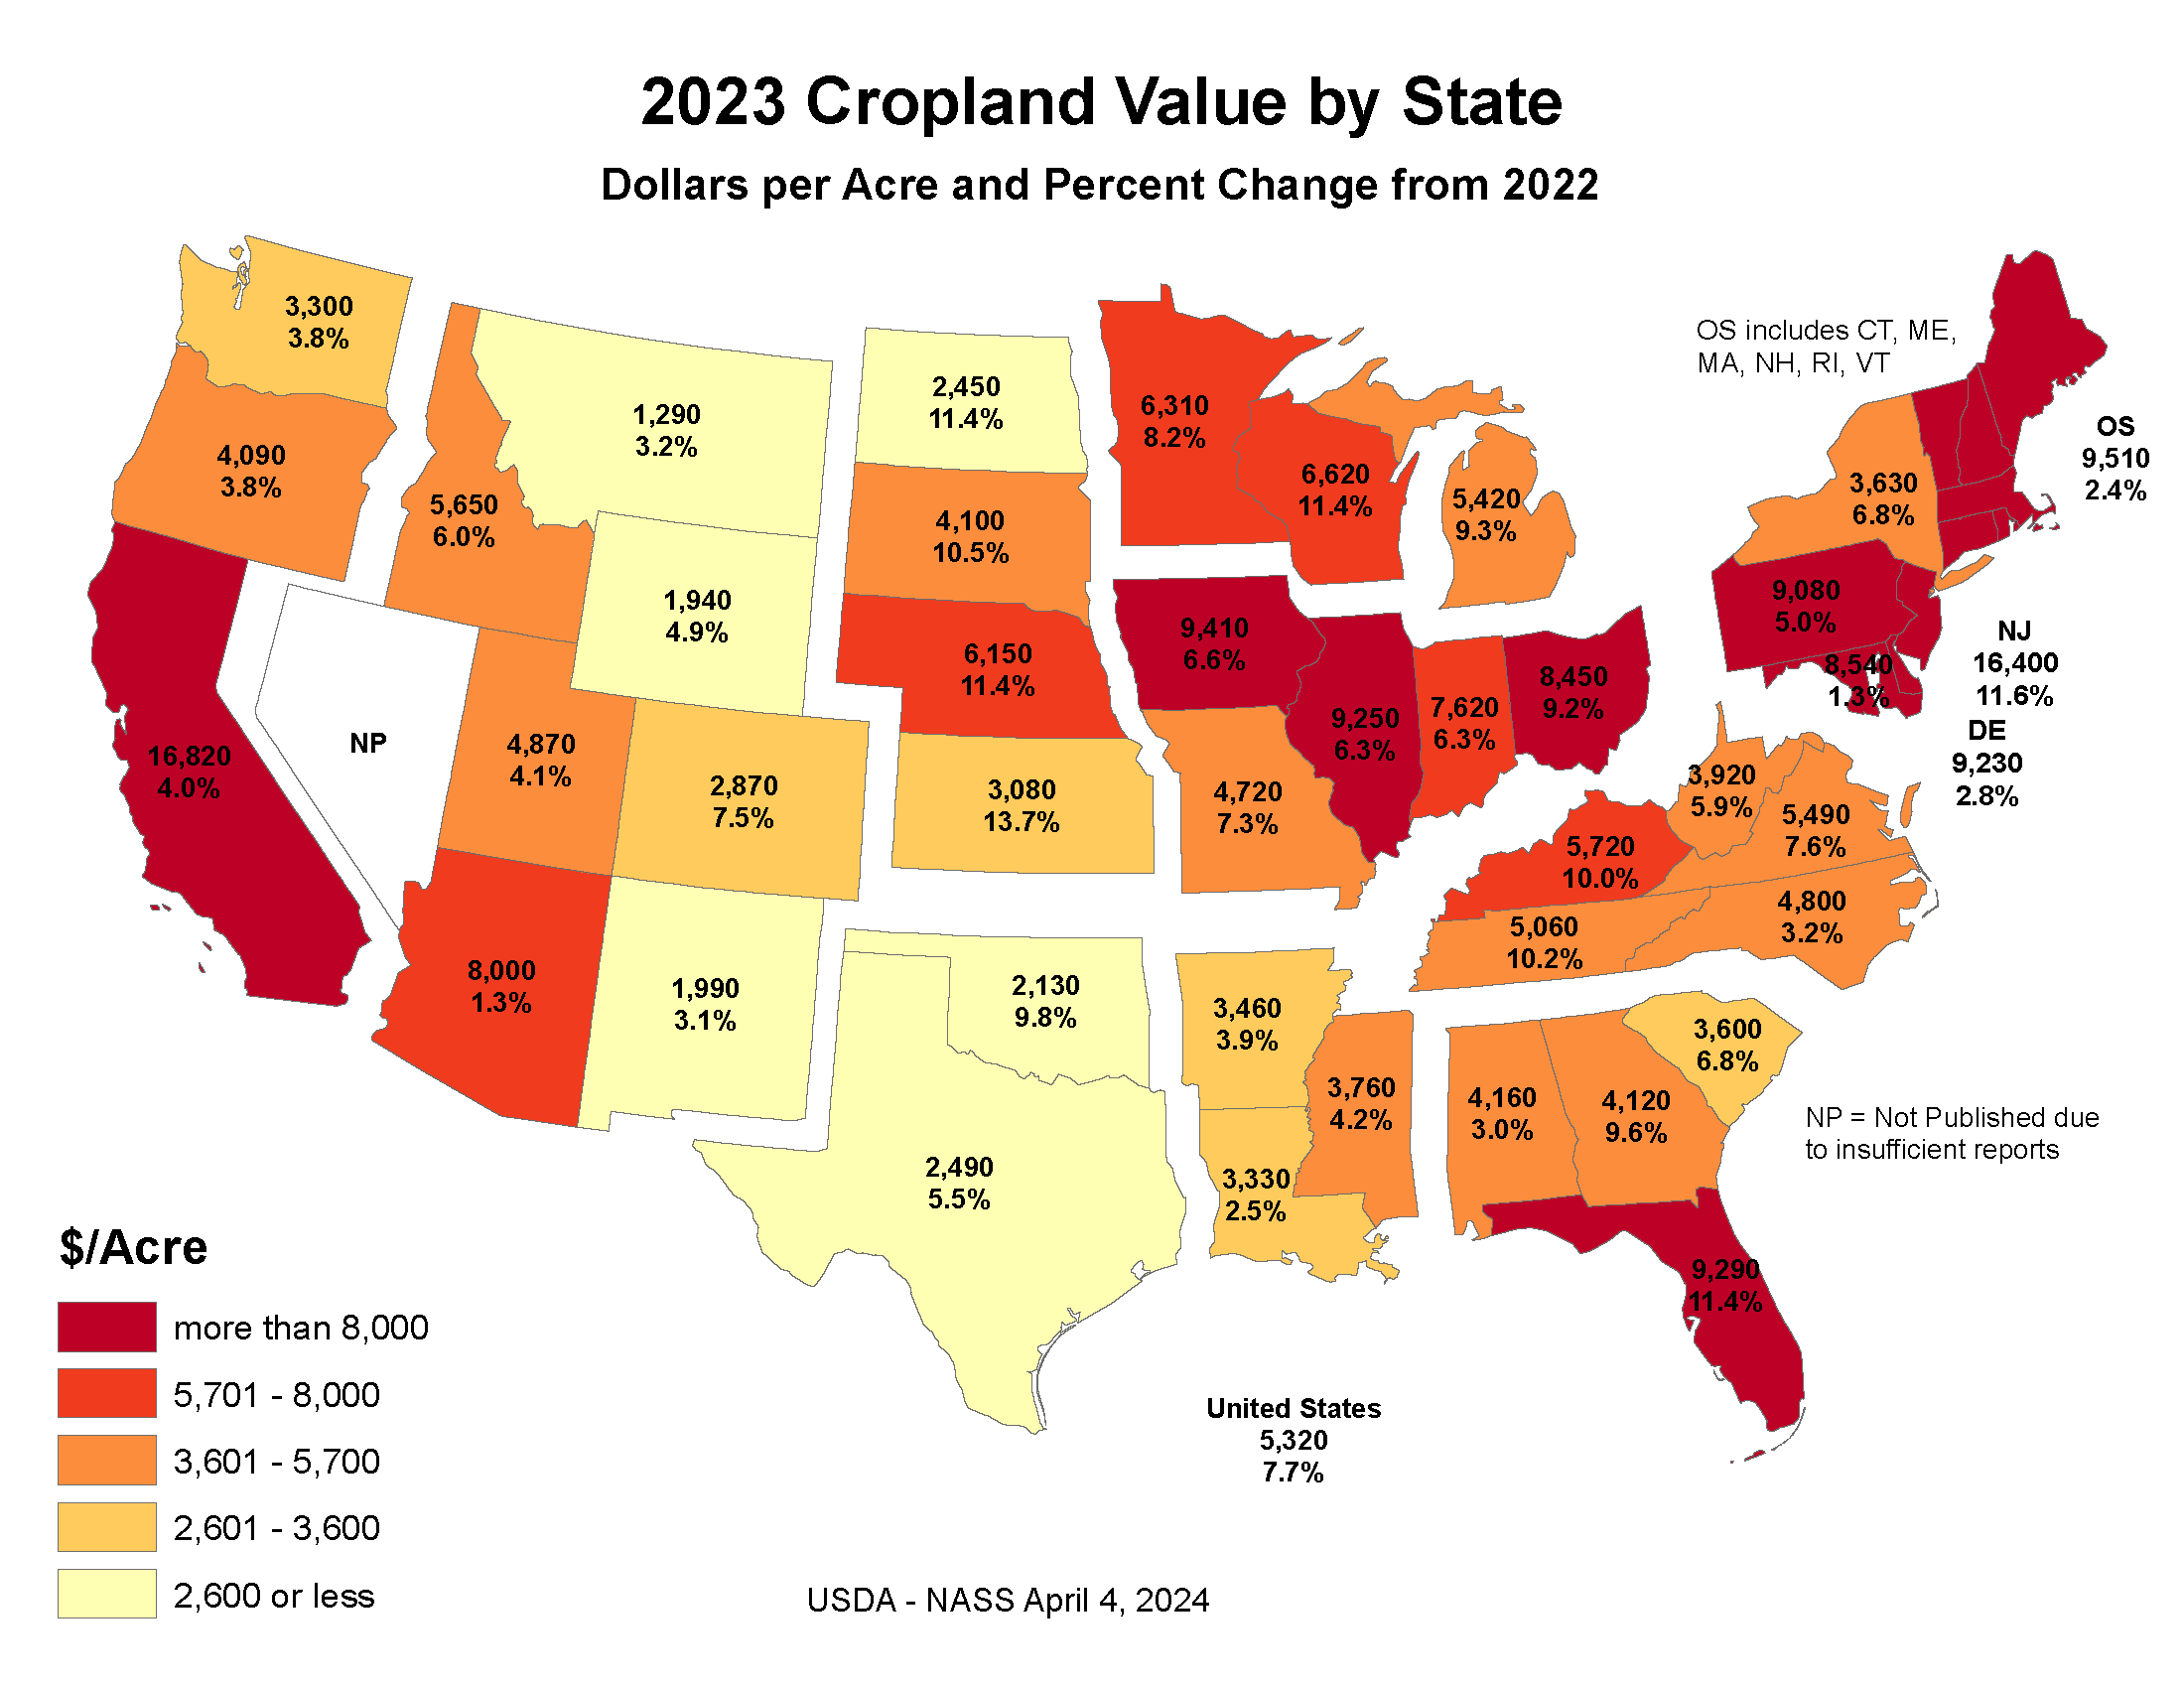 Land Values: Cropland Value by State, US